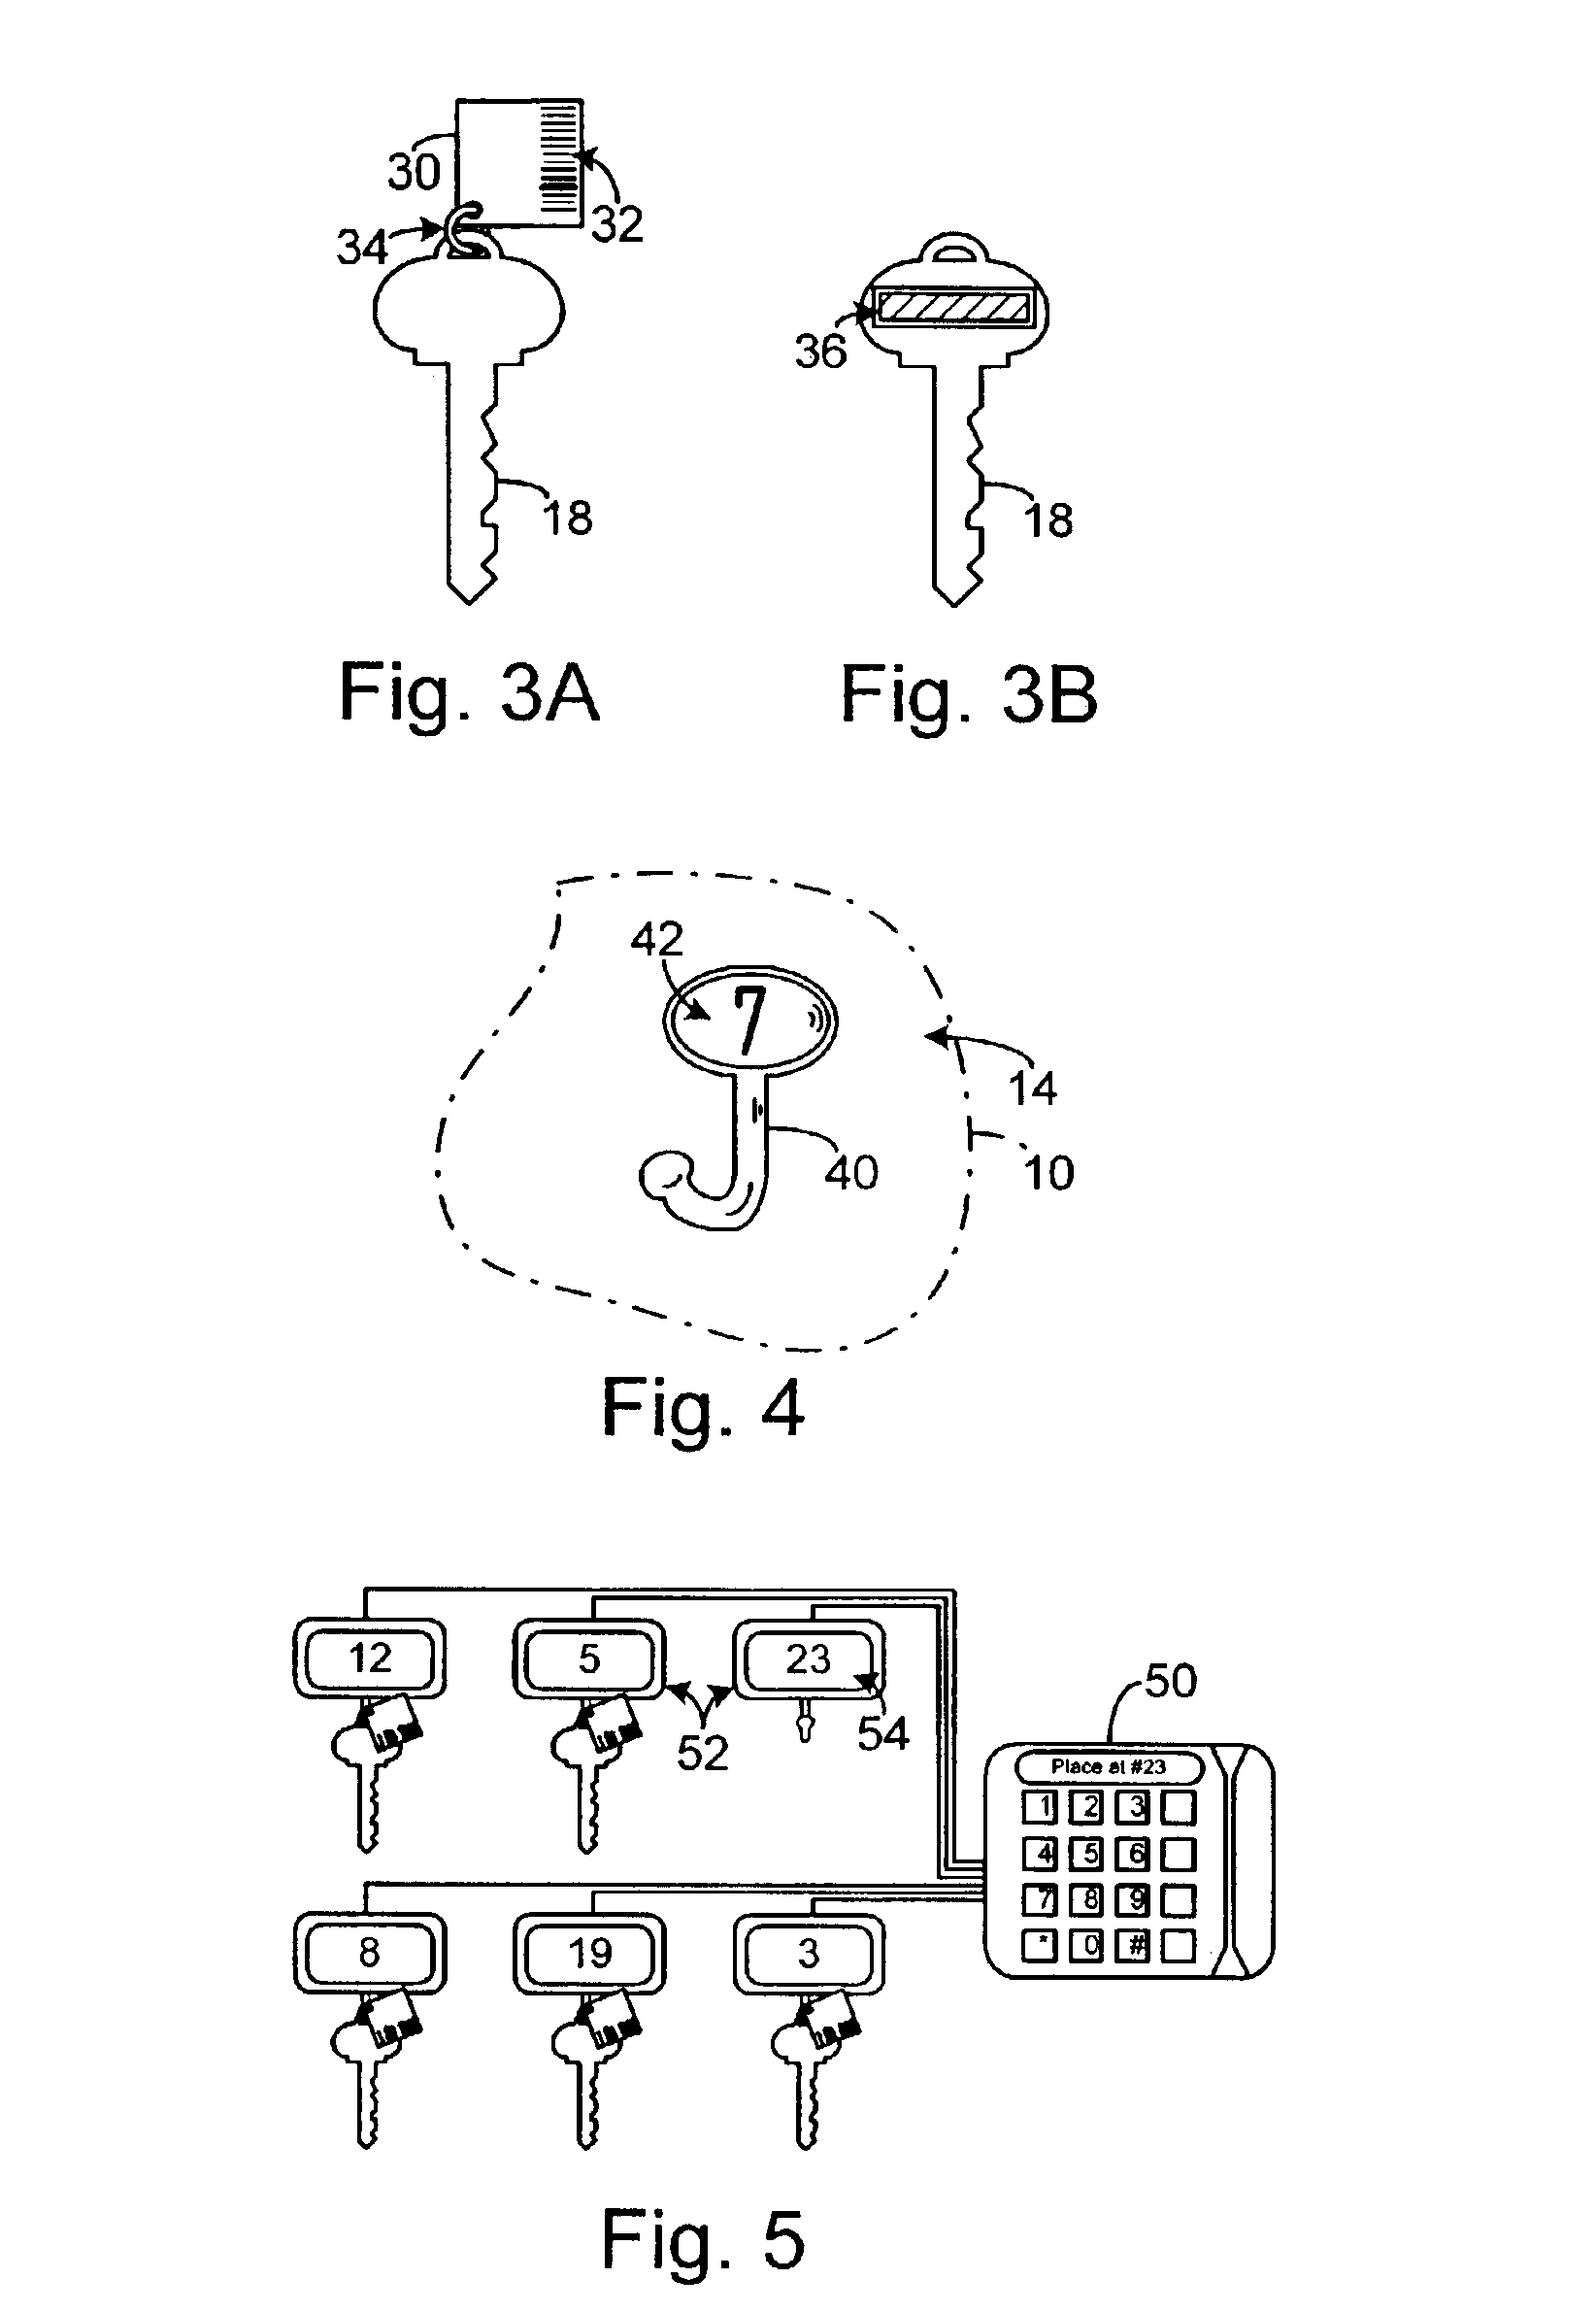 Object container and location tracking system with randomized internal object storage location